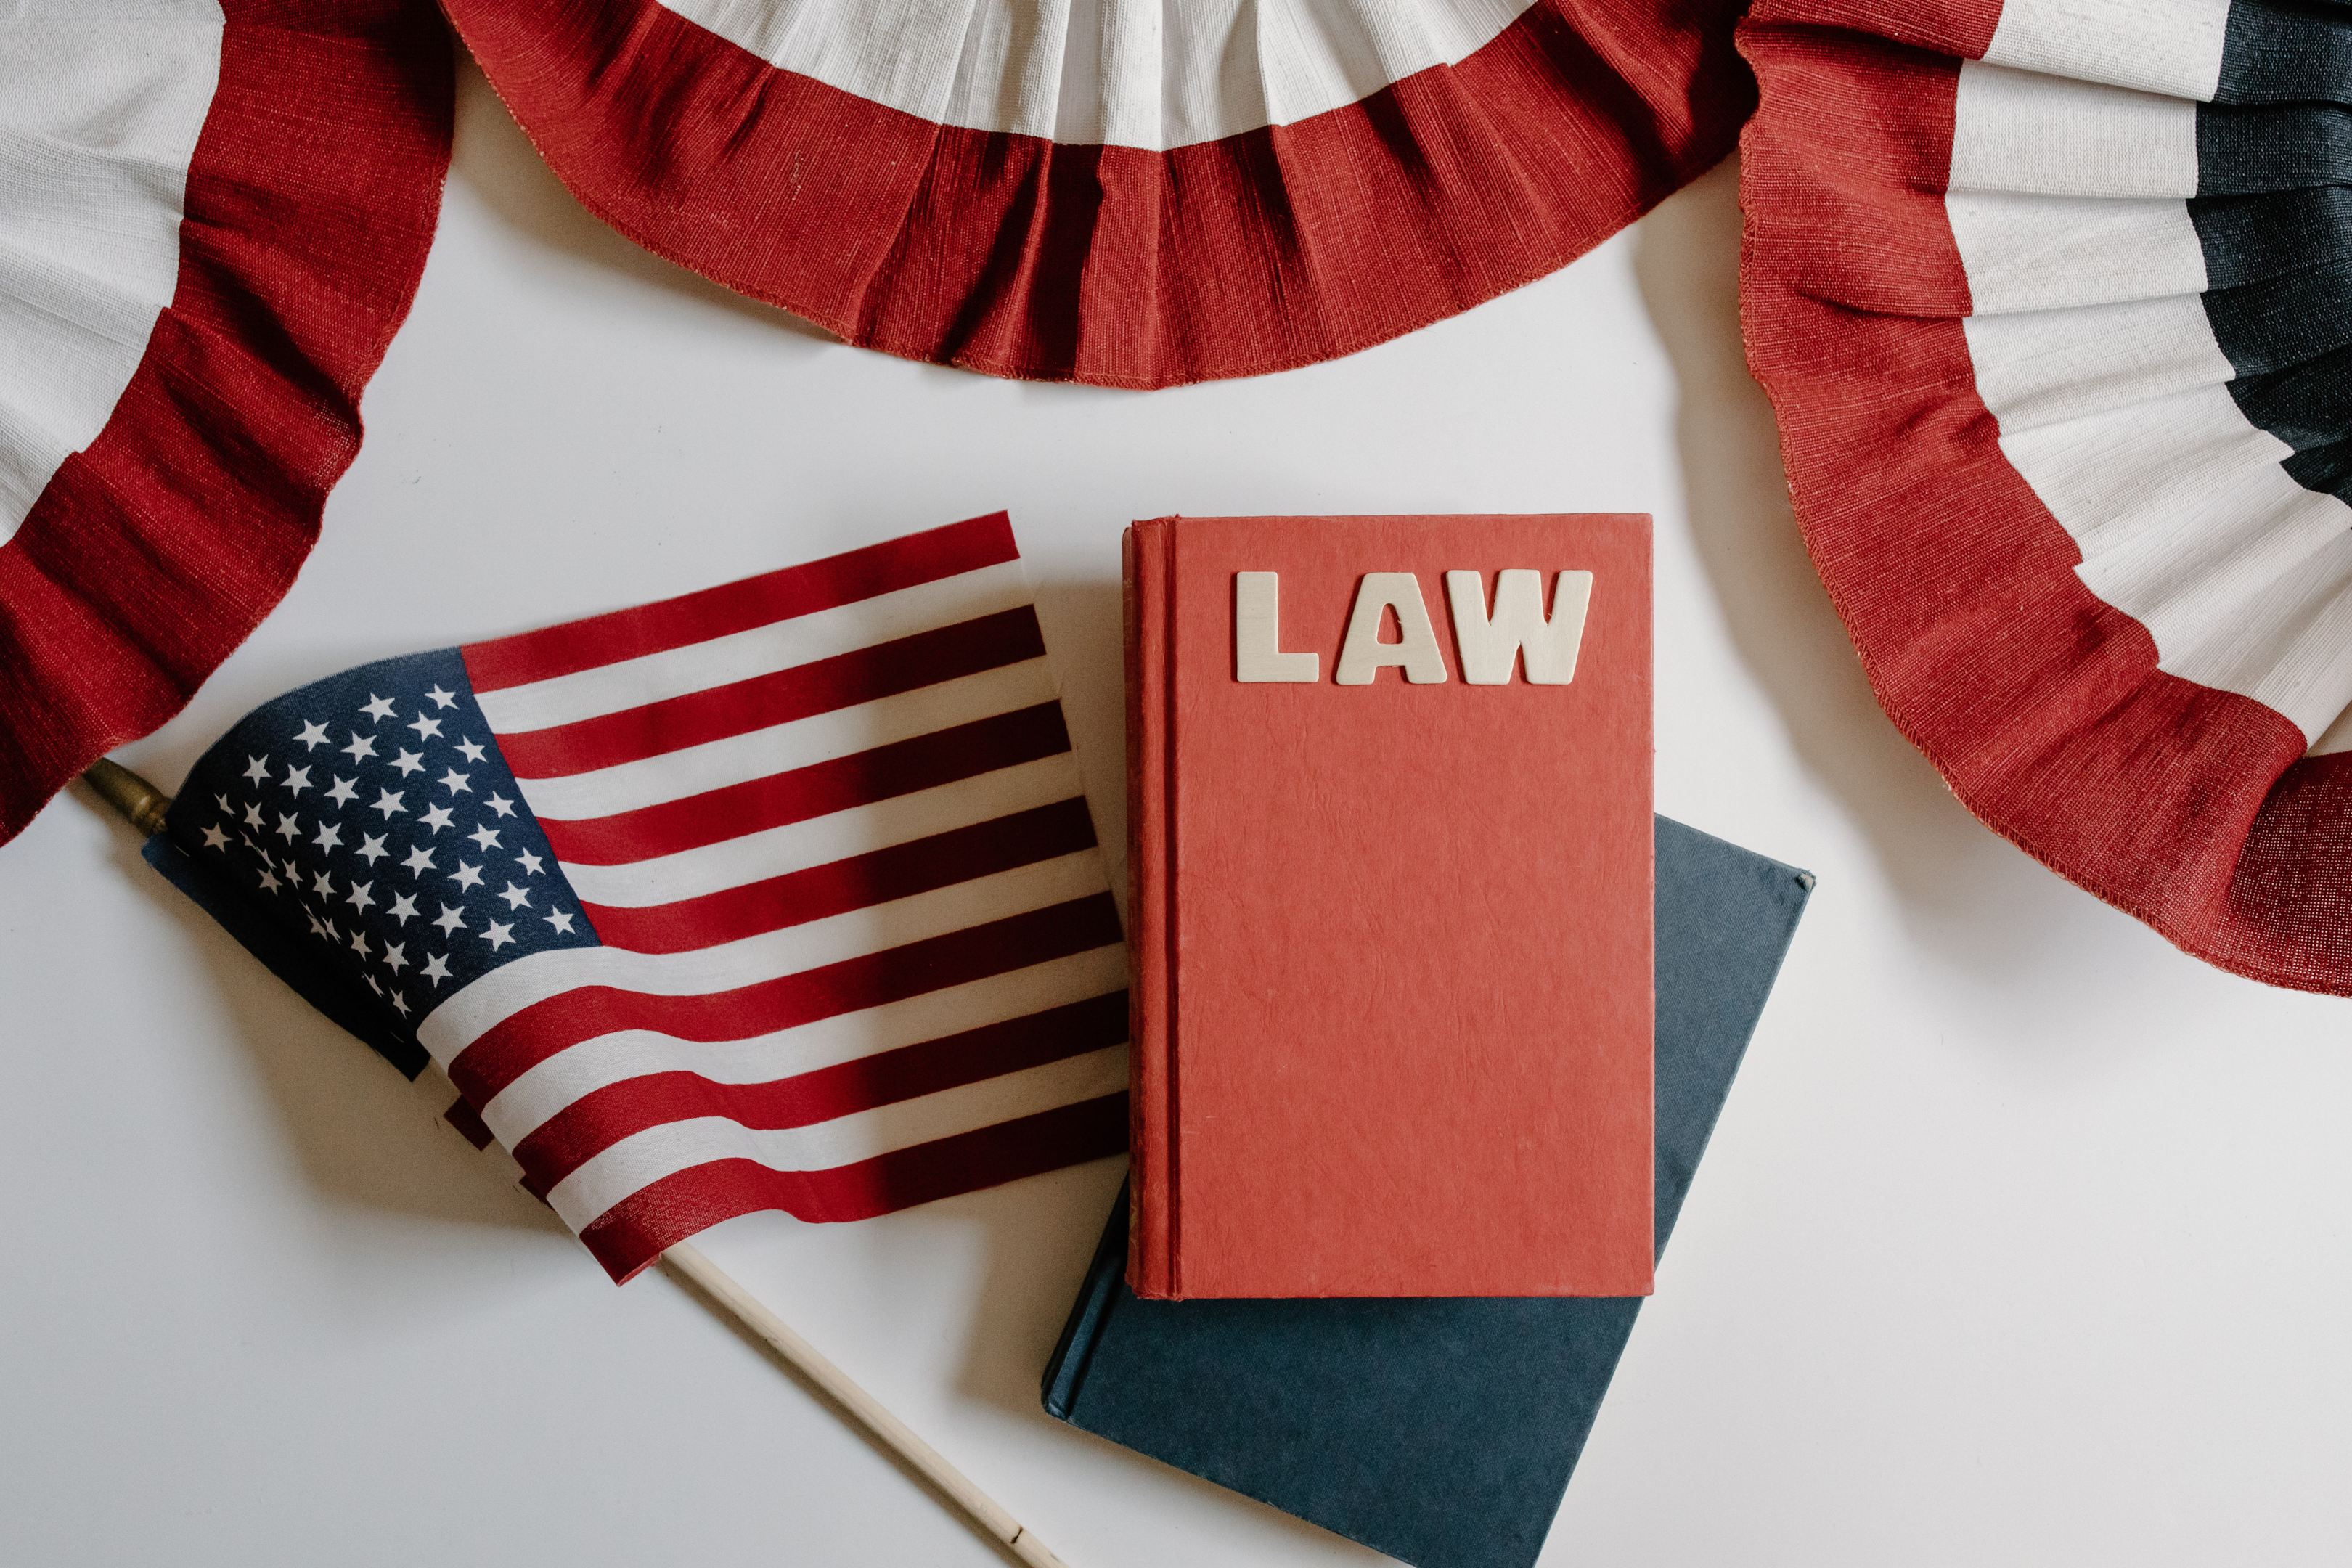 US flag, a red book with text that reads "law" and 4th of July buntings on white background